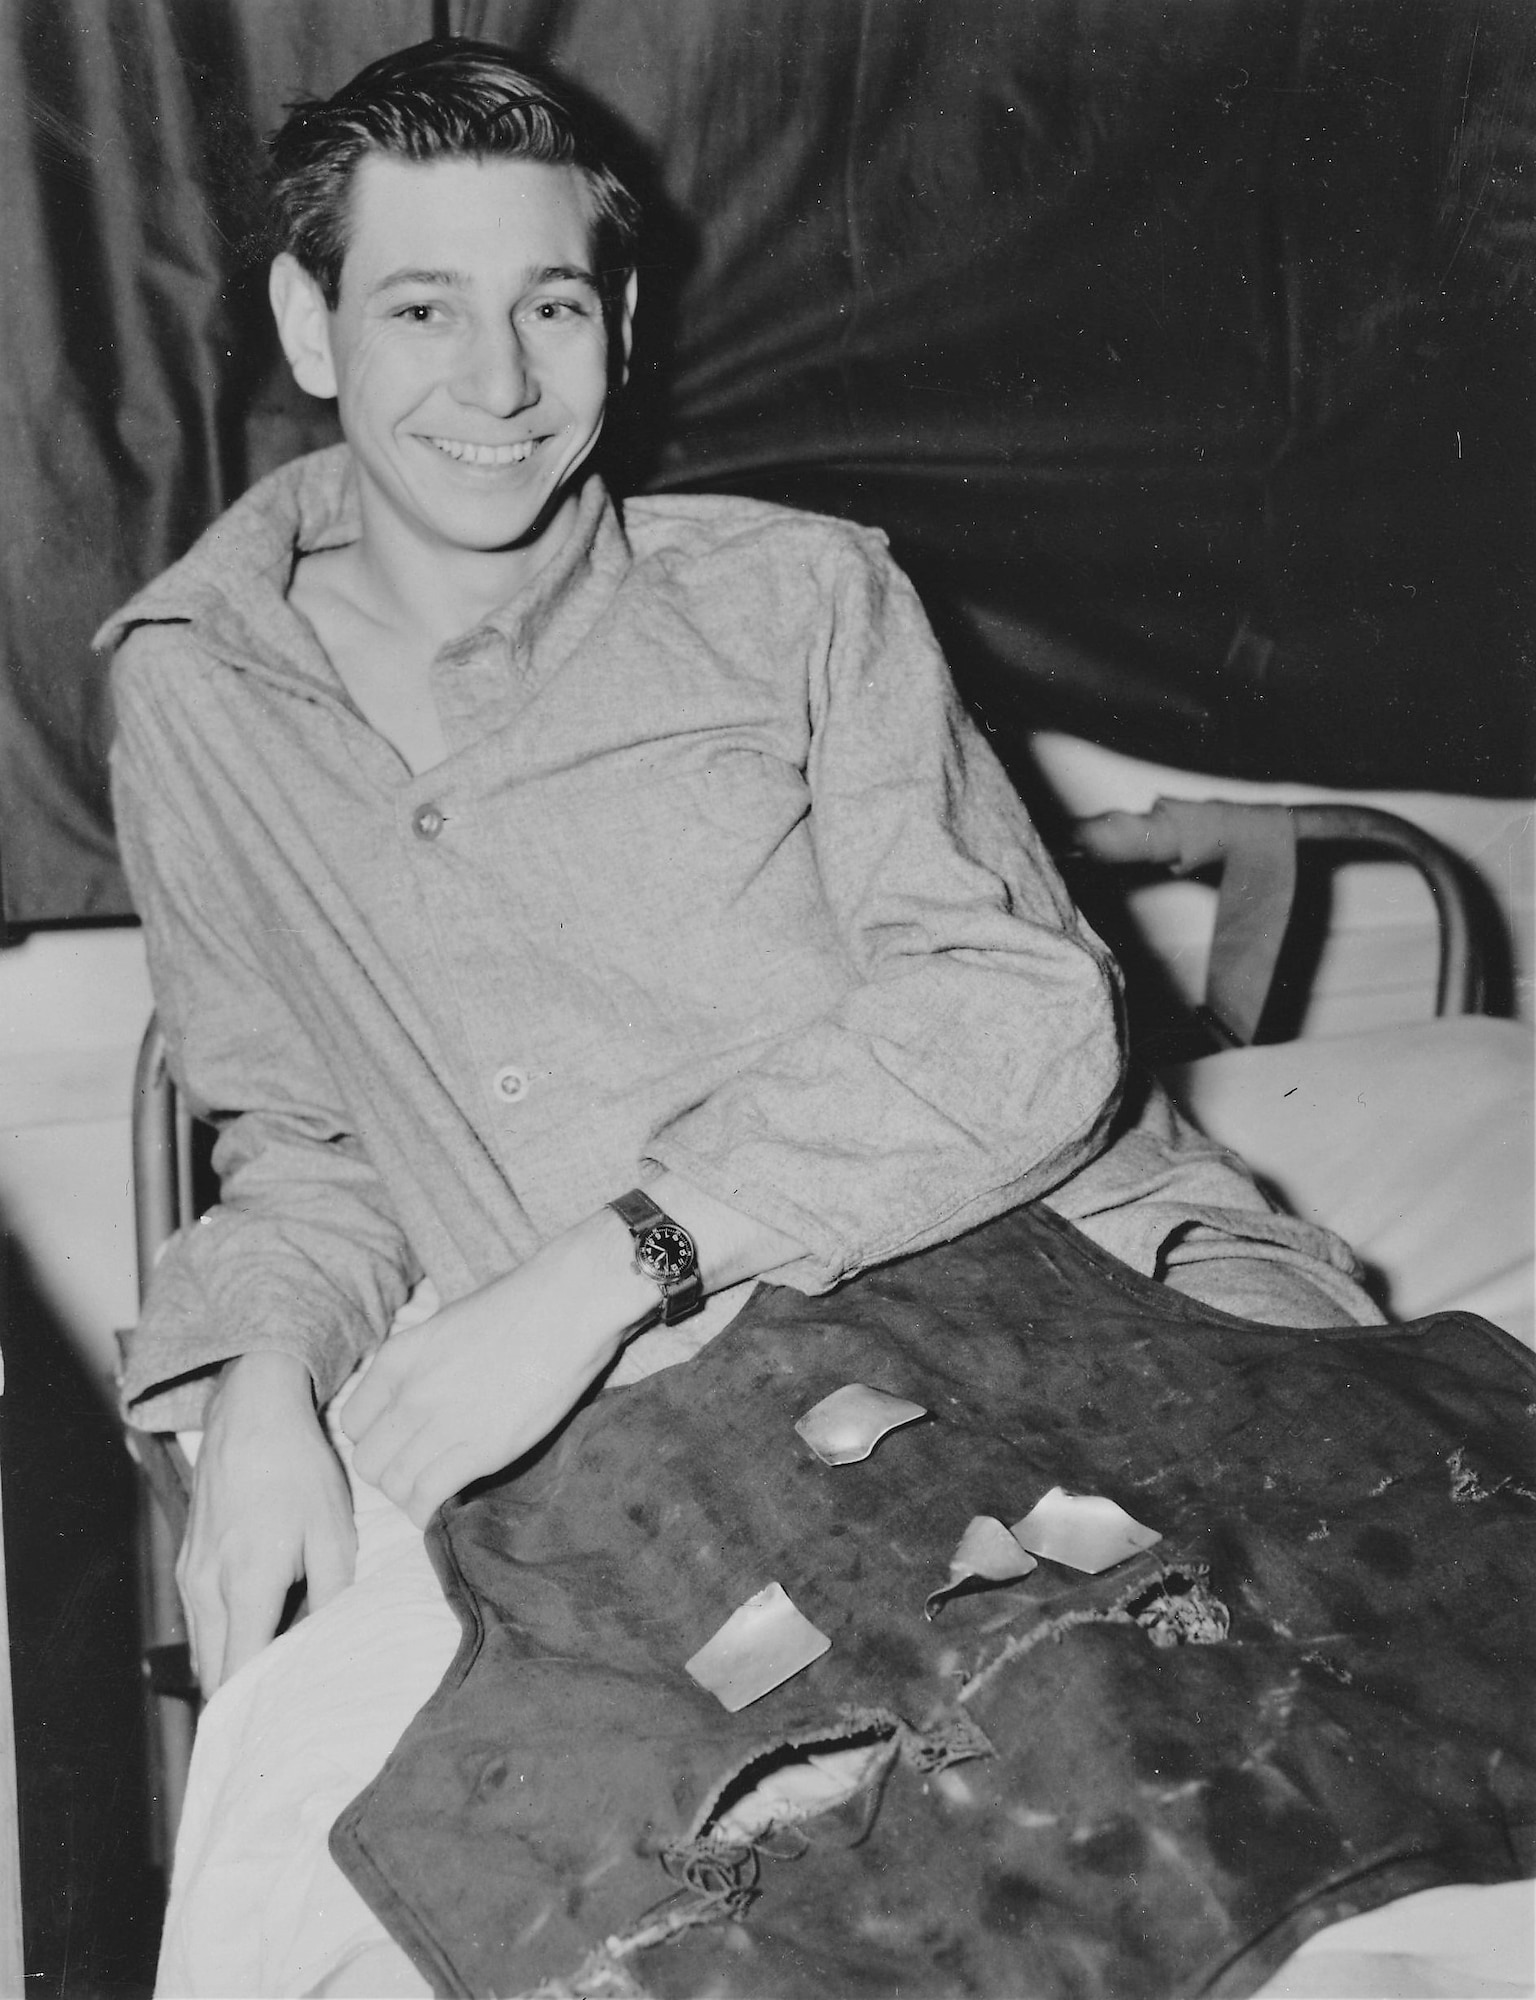 B-17 Flying Fortress radio operator Sgt. James Bothwell, smiles as he displays the back of the flak jacket that saved his life over Germany. He sustained only minor injuries. (U.S. Air Force photo)